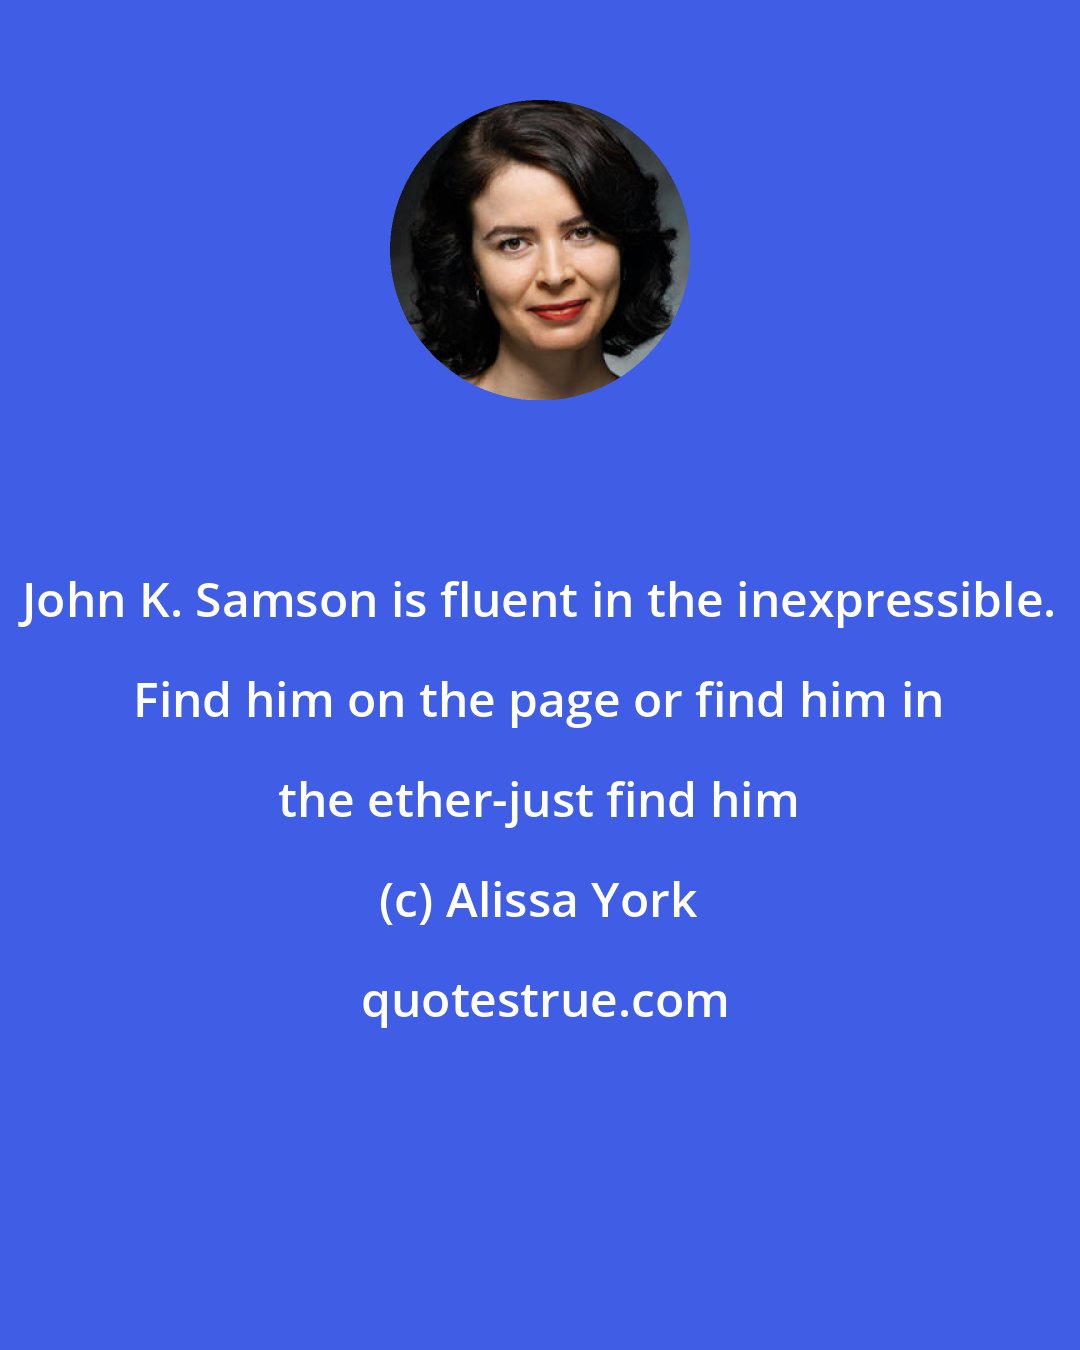 Alissa York: John K. Samson is fluent in the inexpressible. Find him on the page or find him in the ether-just find him